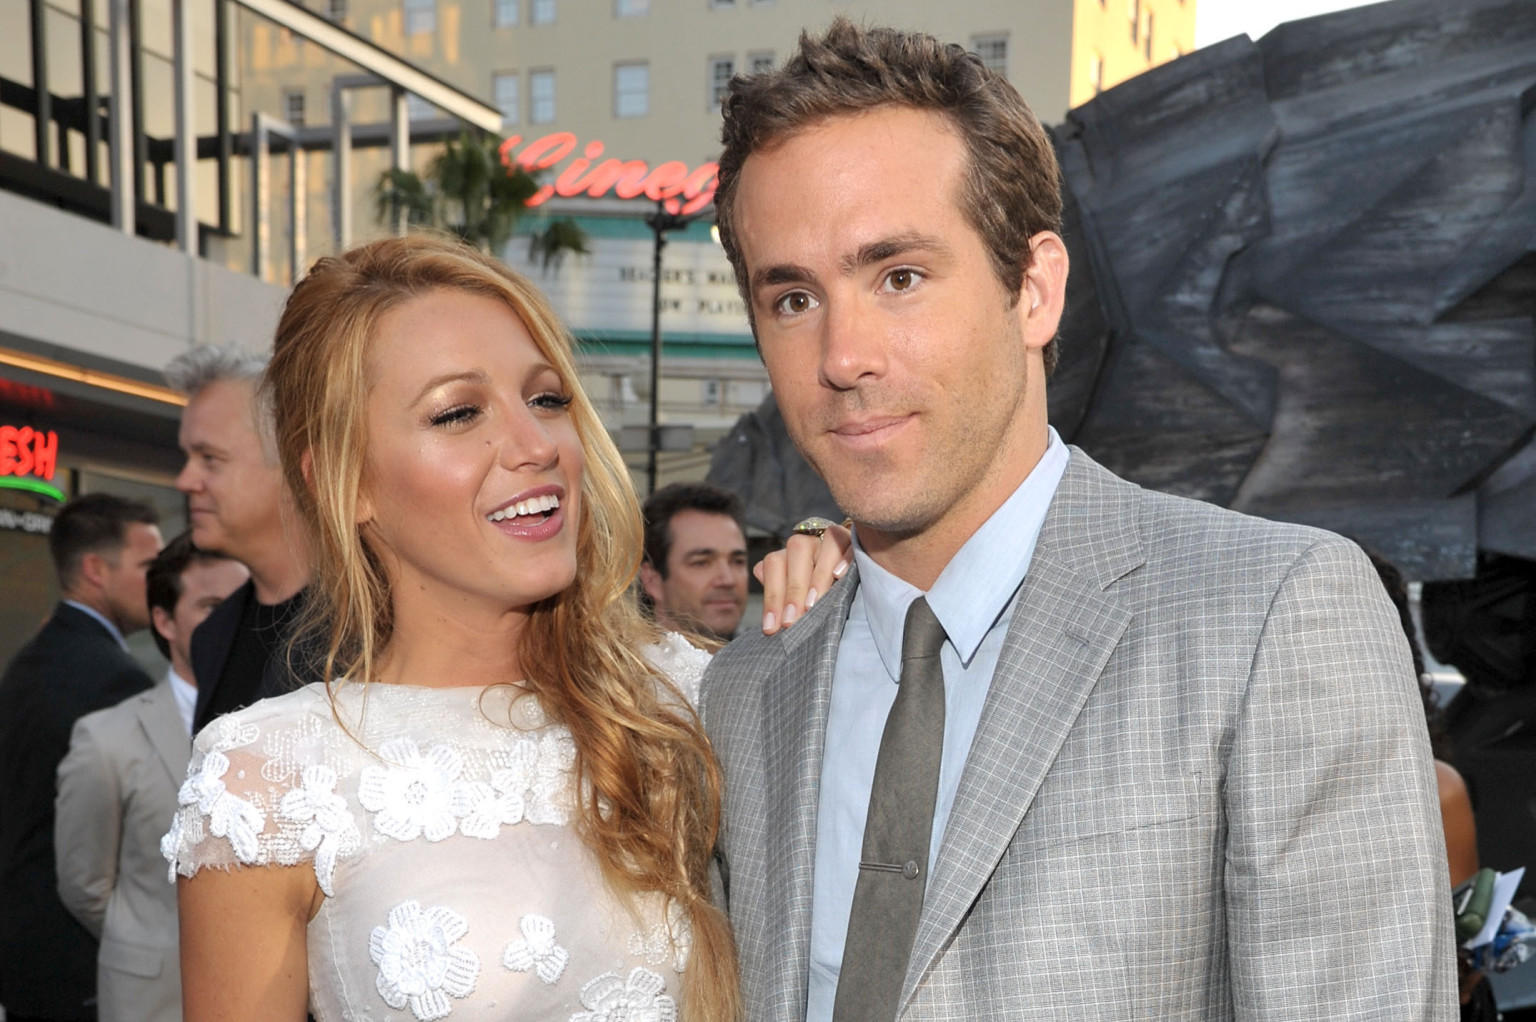 Blake Lively Dresses Husband Ryan Reynolds And We're Surprised!1536 x 1022